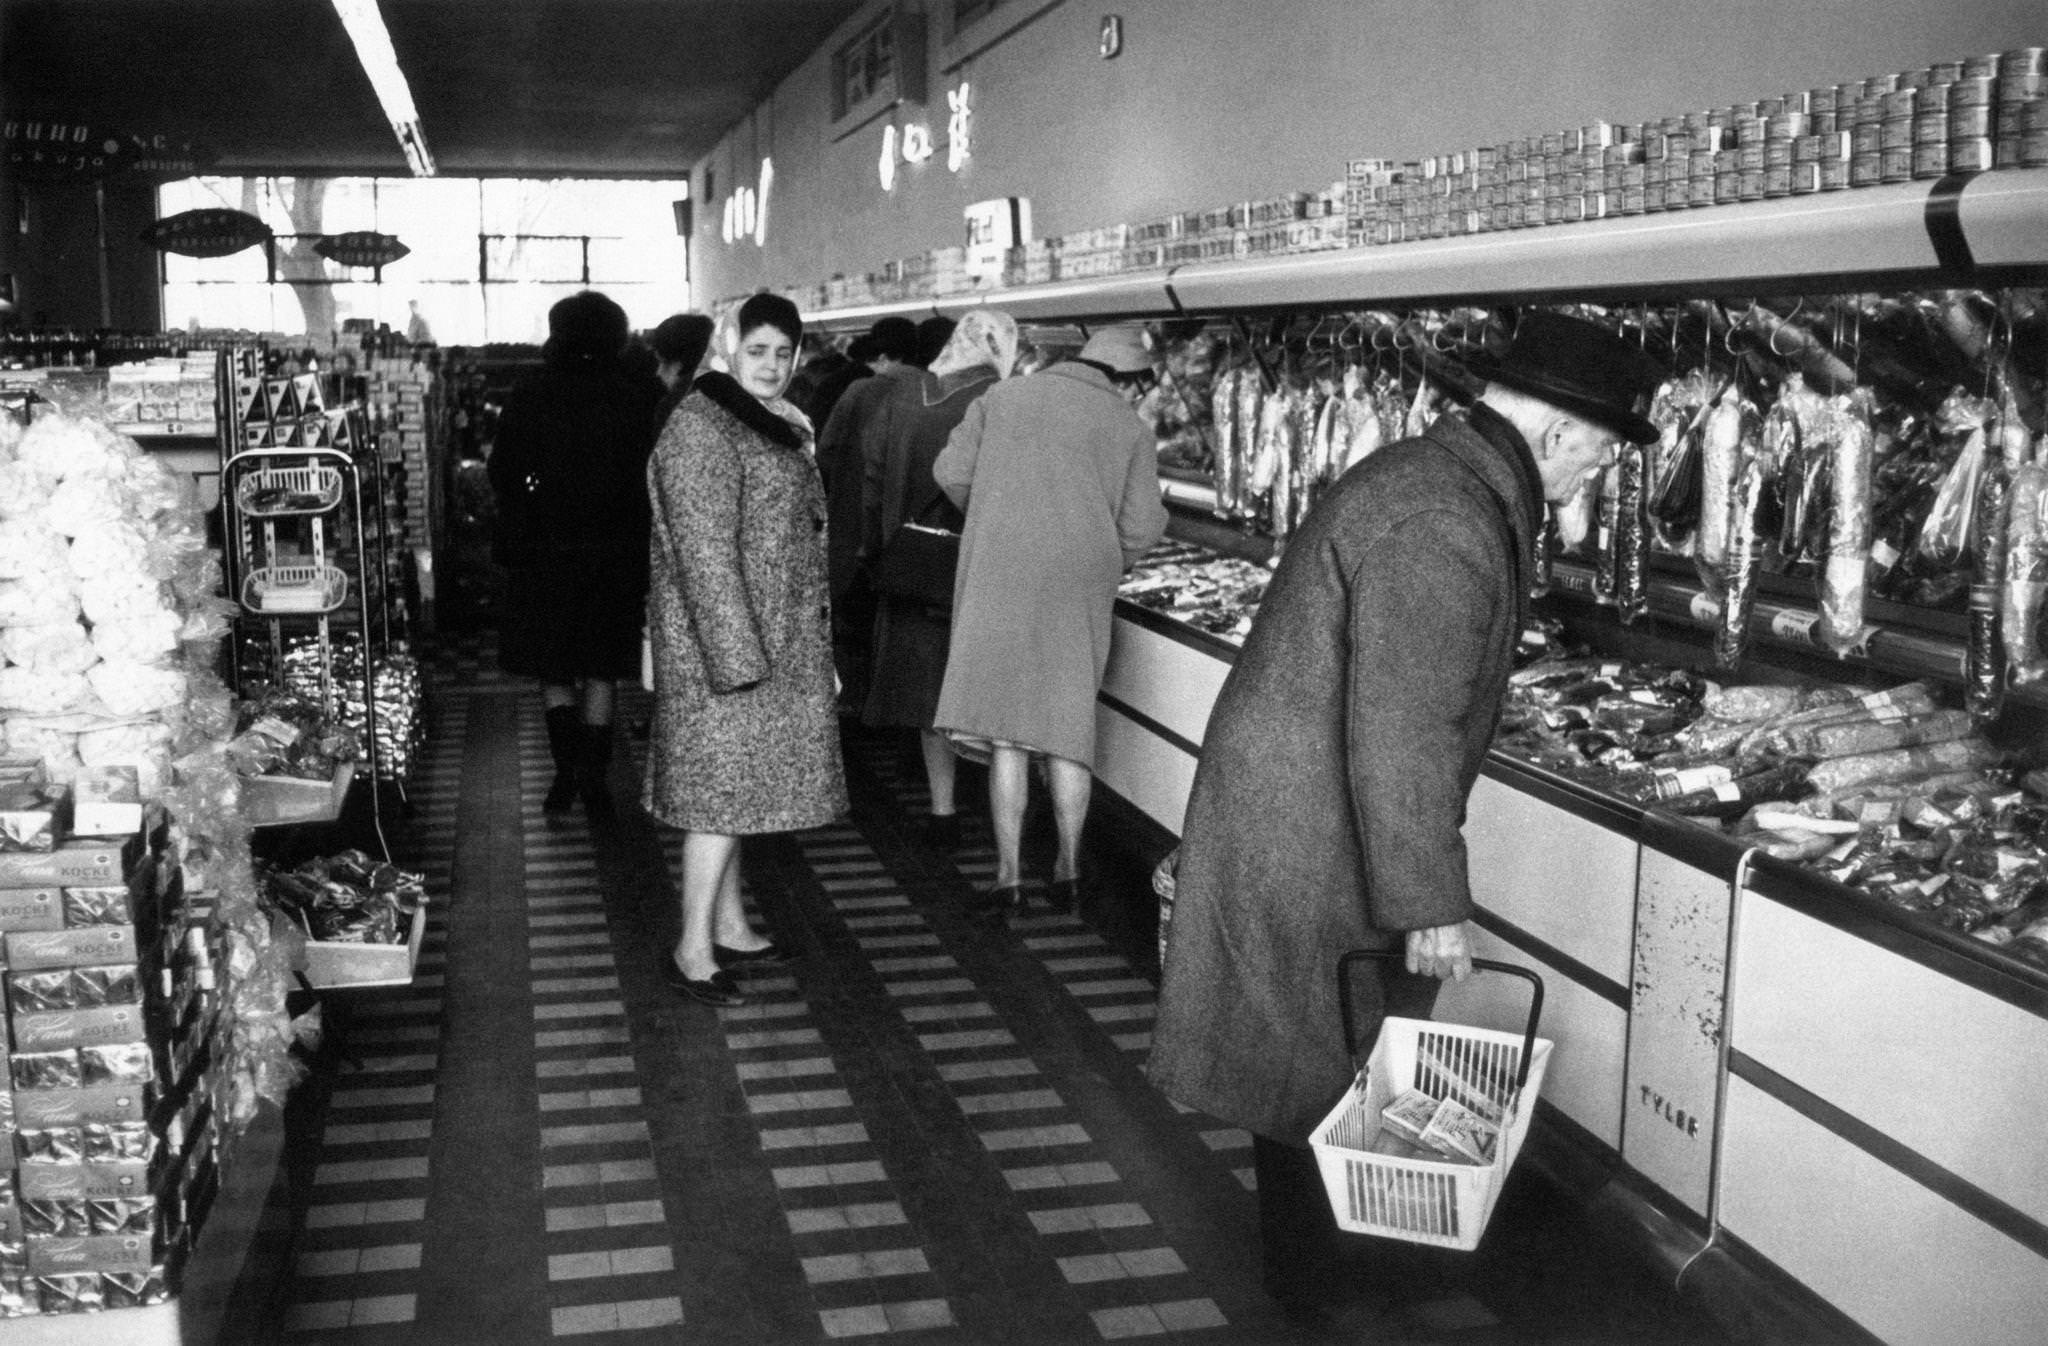 People shopping at the supermarket in Belgrade, Serbia, 1965